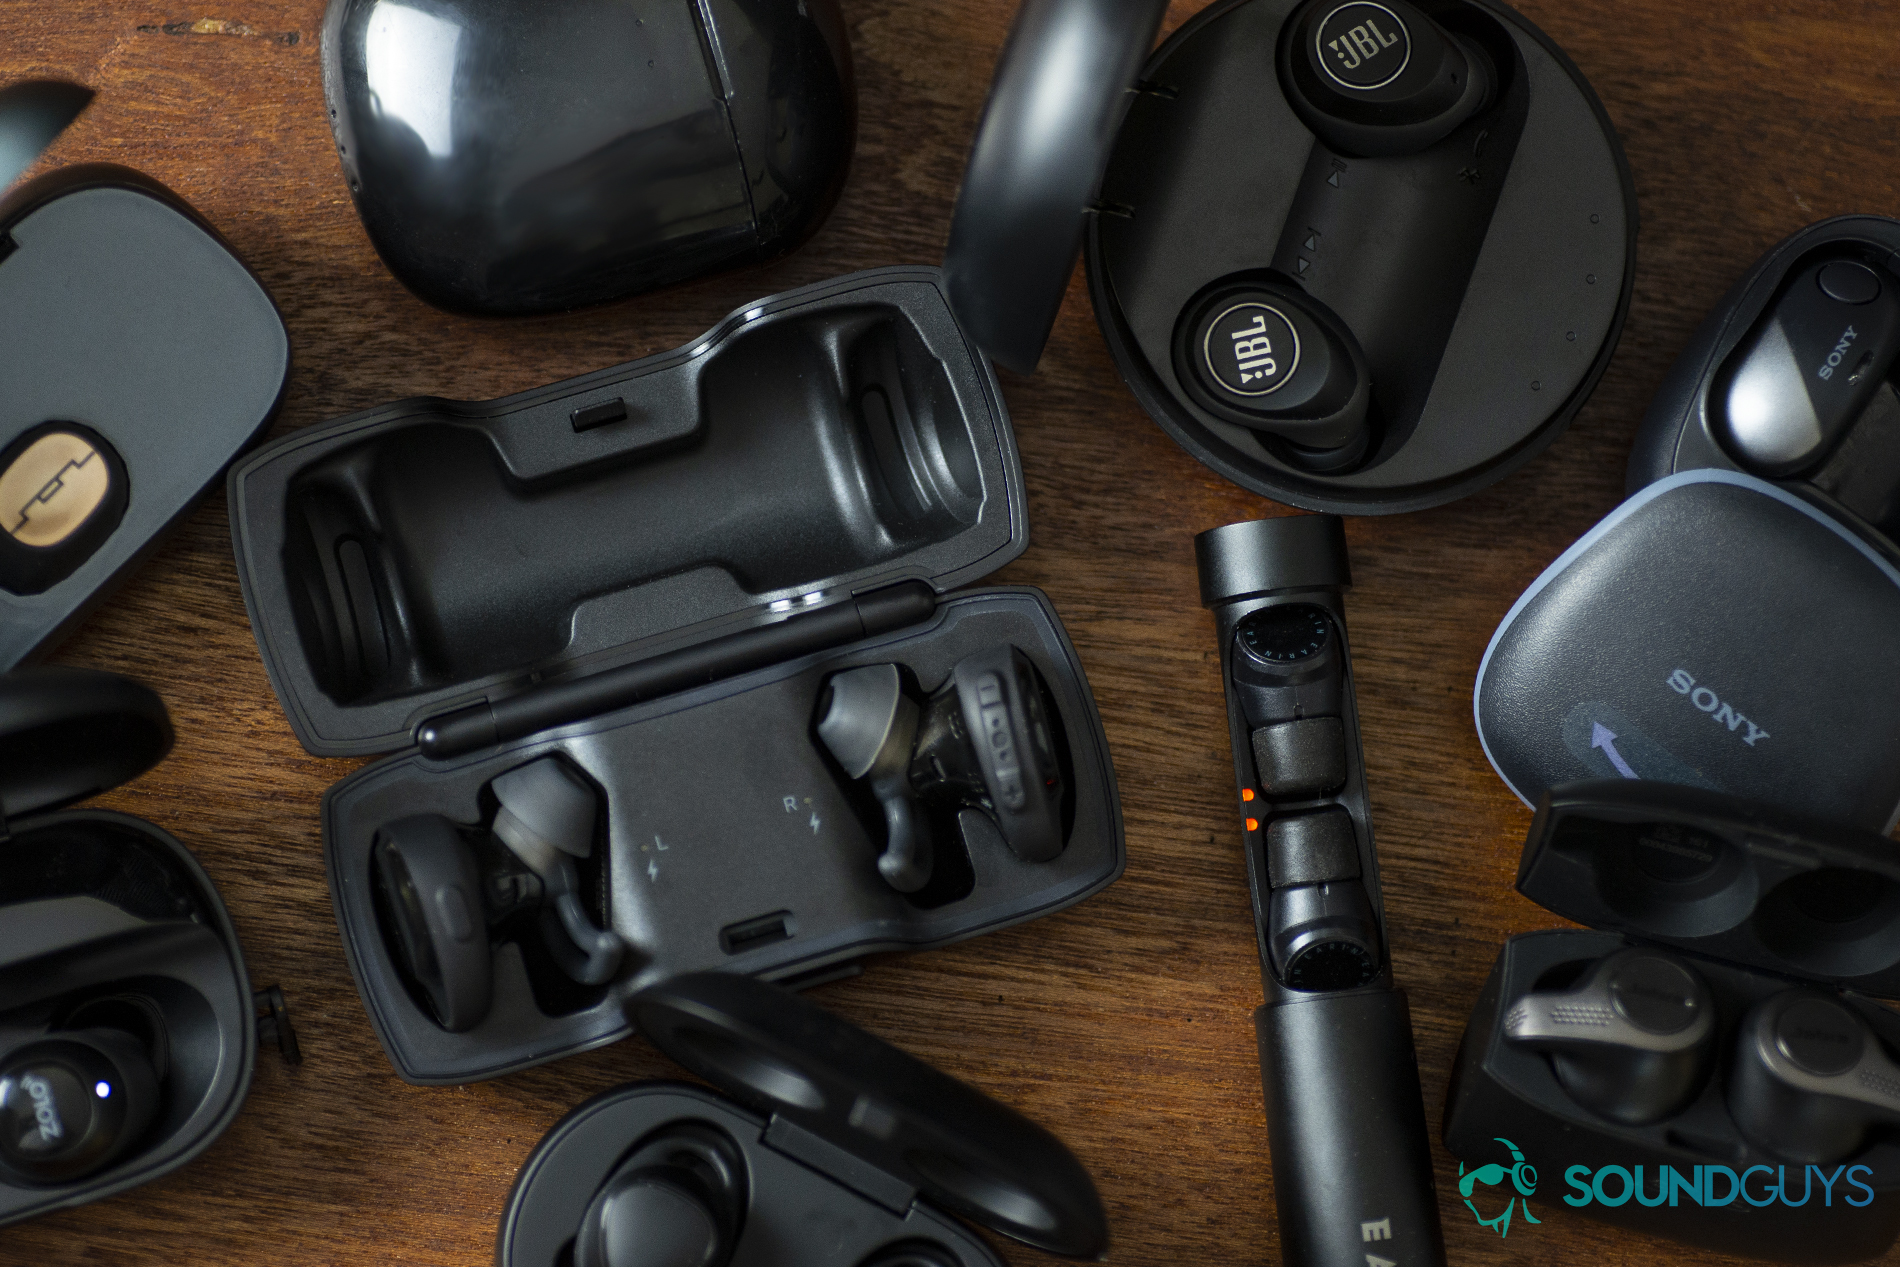 Top 3 excuses for ditching the heapdhone jack: A photo of several true wireless earbuds, including the Anker Zolo Liberty, Bose SoundSport Free, Earin M-2, Jabra Elite 65t, JBL Free, Optoma Nuforce BE Free8, Samsung Gear IconX, Sol Republic Amps Air, and the Sony WF-SP700N.